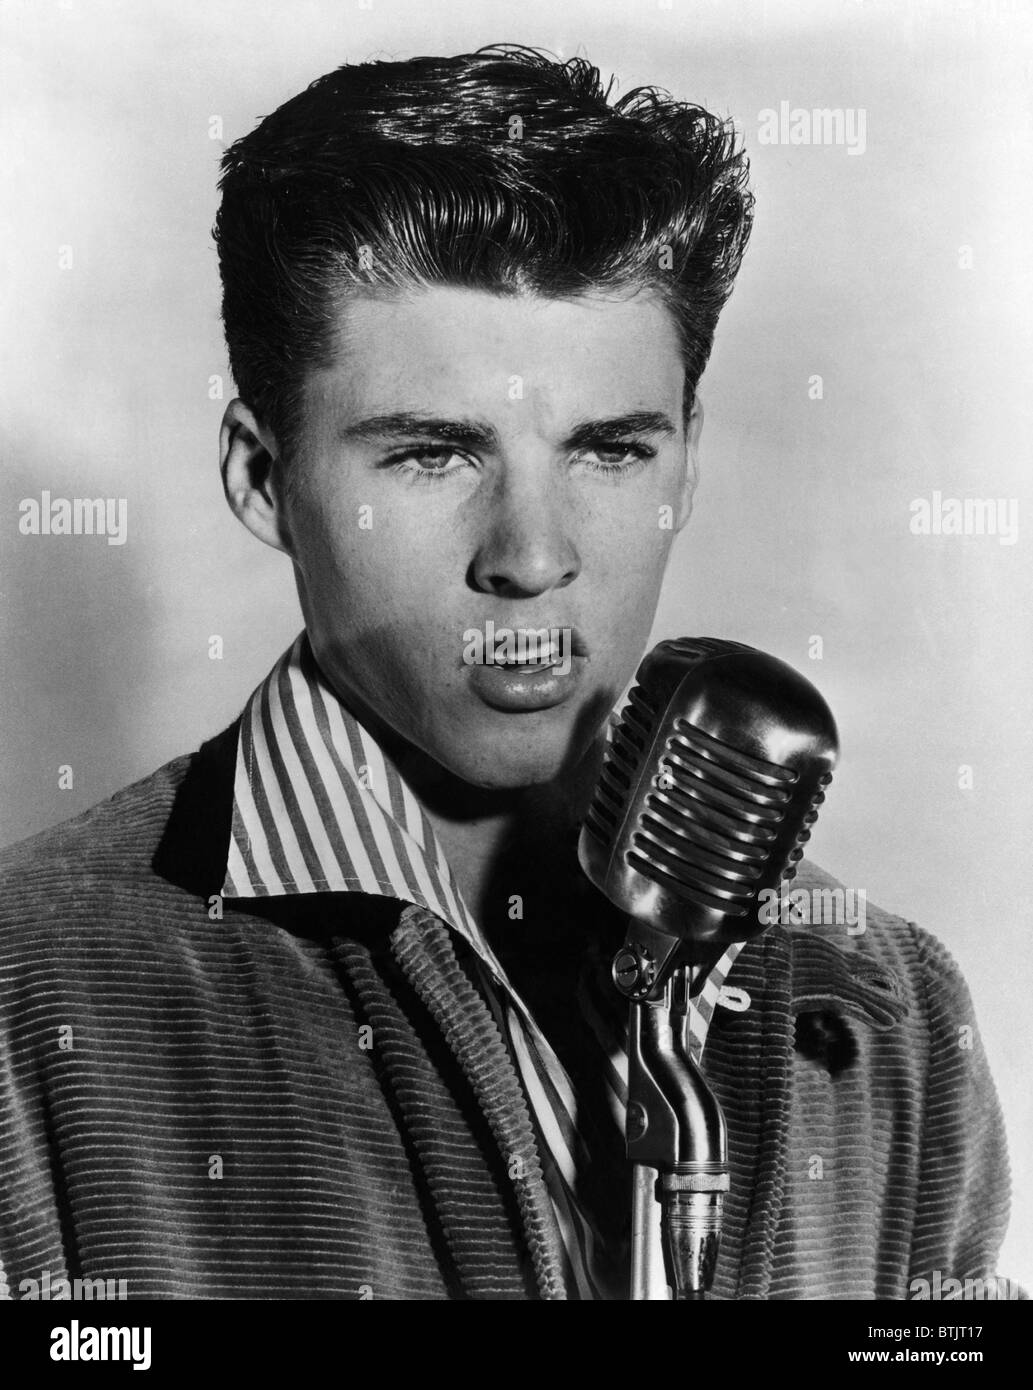 Singer and teen idol Ricky Nelson, (1940-1985), c. 1957. Stock Photo